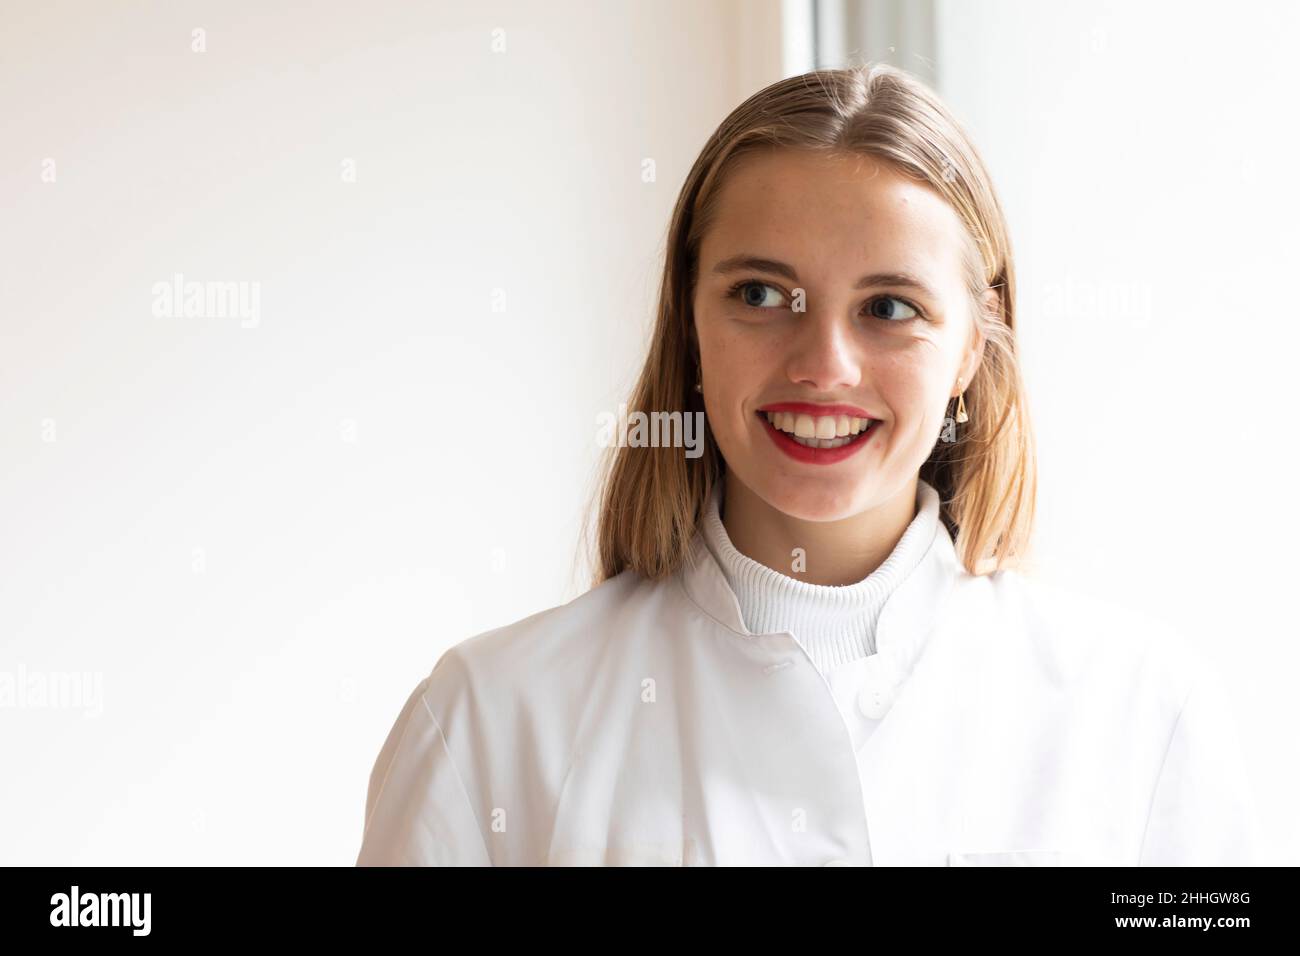 Portrait of smiling young woman in lab coat Stock Photo